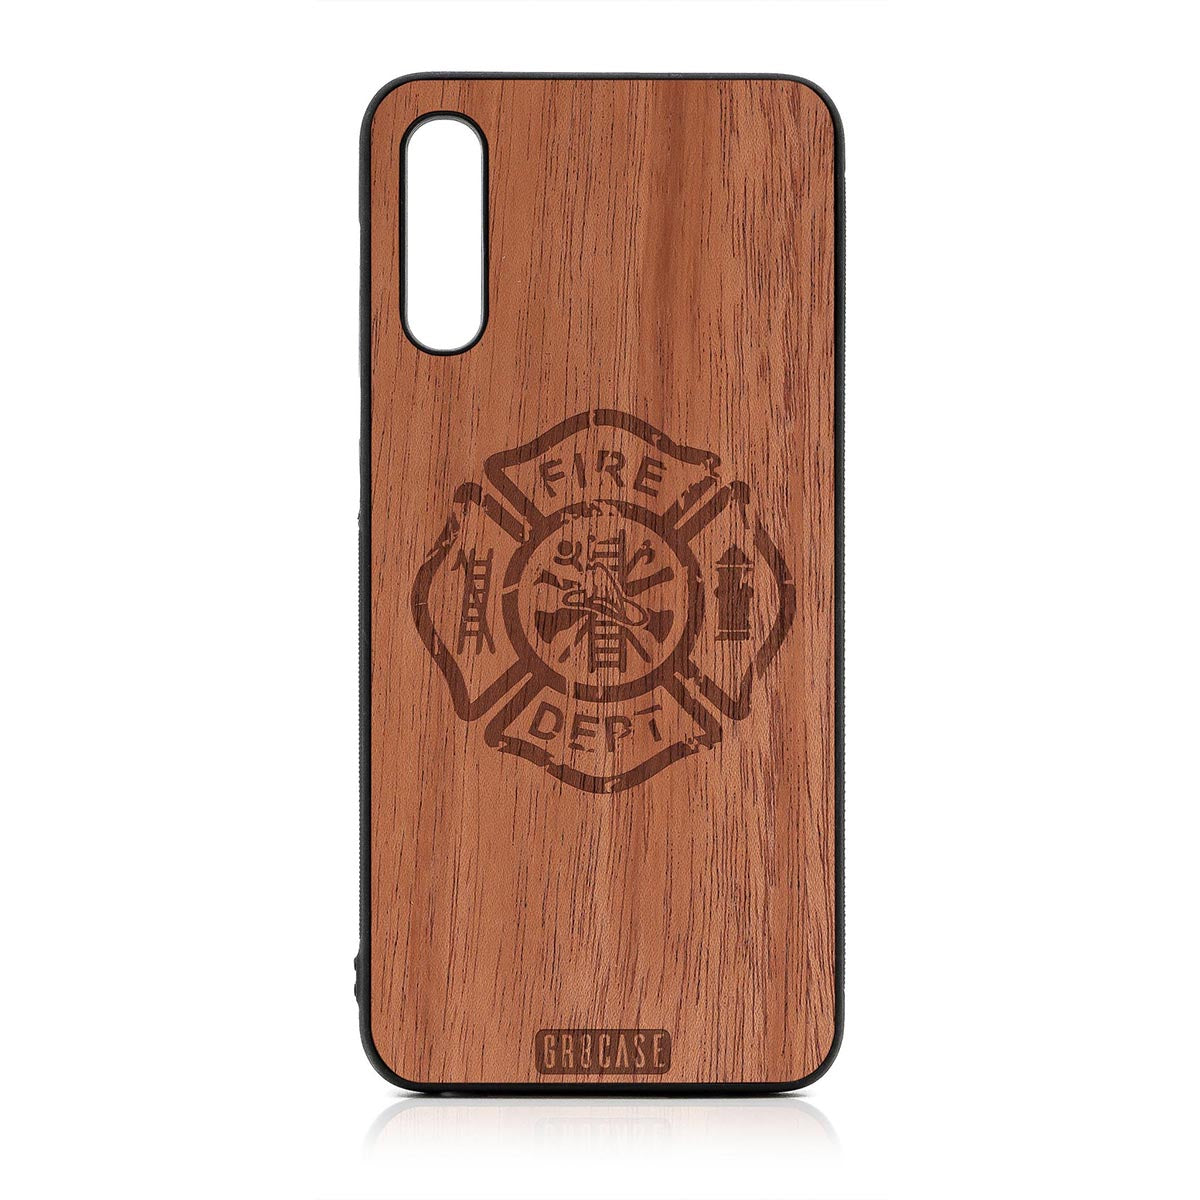 Fire Department Design Wood Case For Samsung Galaxy A50 by GR8CASE